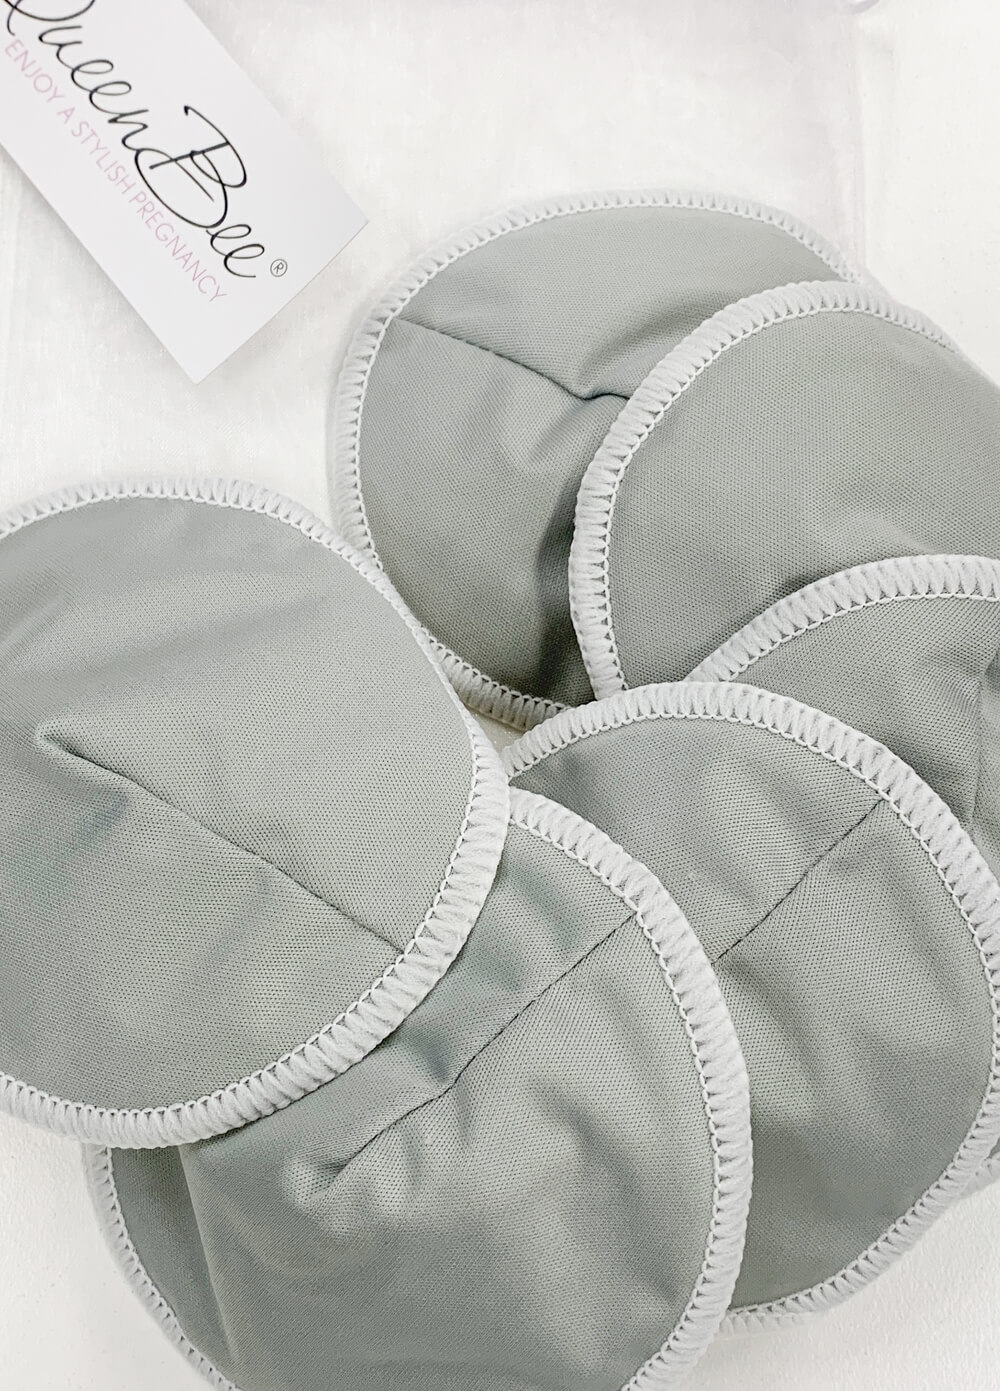 Contoured Resuable Bamboo Nursing Pads (3 Pairs) in Charcoal